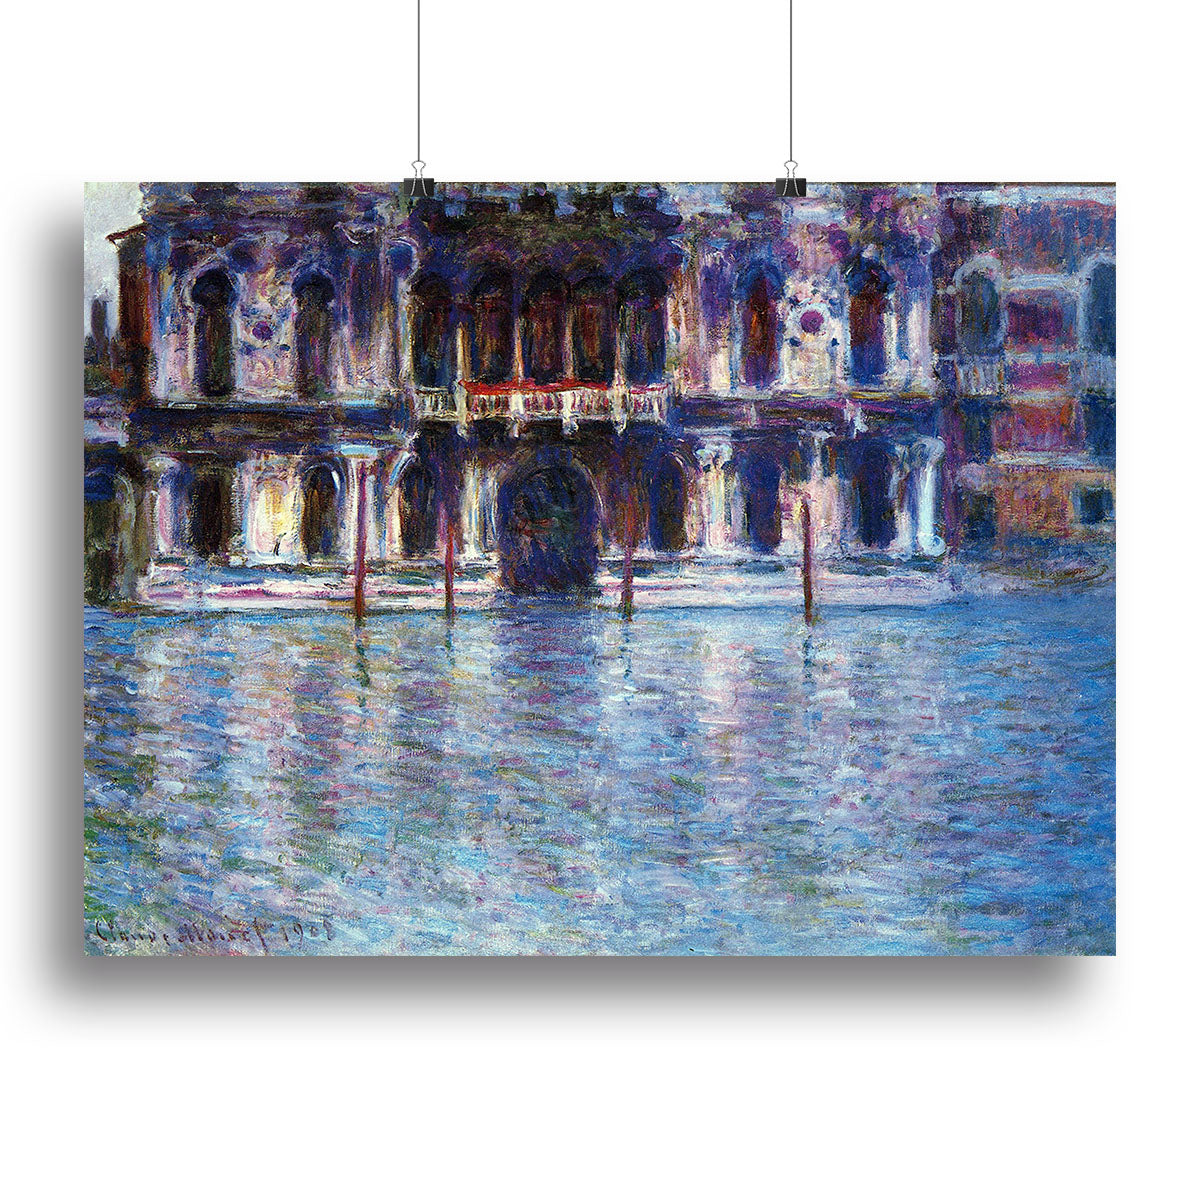 Palazzo 2 by Monet Canvas Print or Poster - Canvas Art Rocks - 2